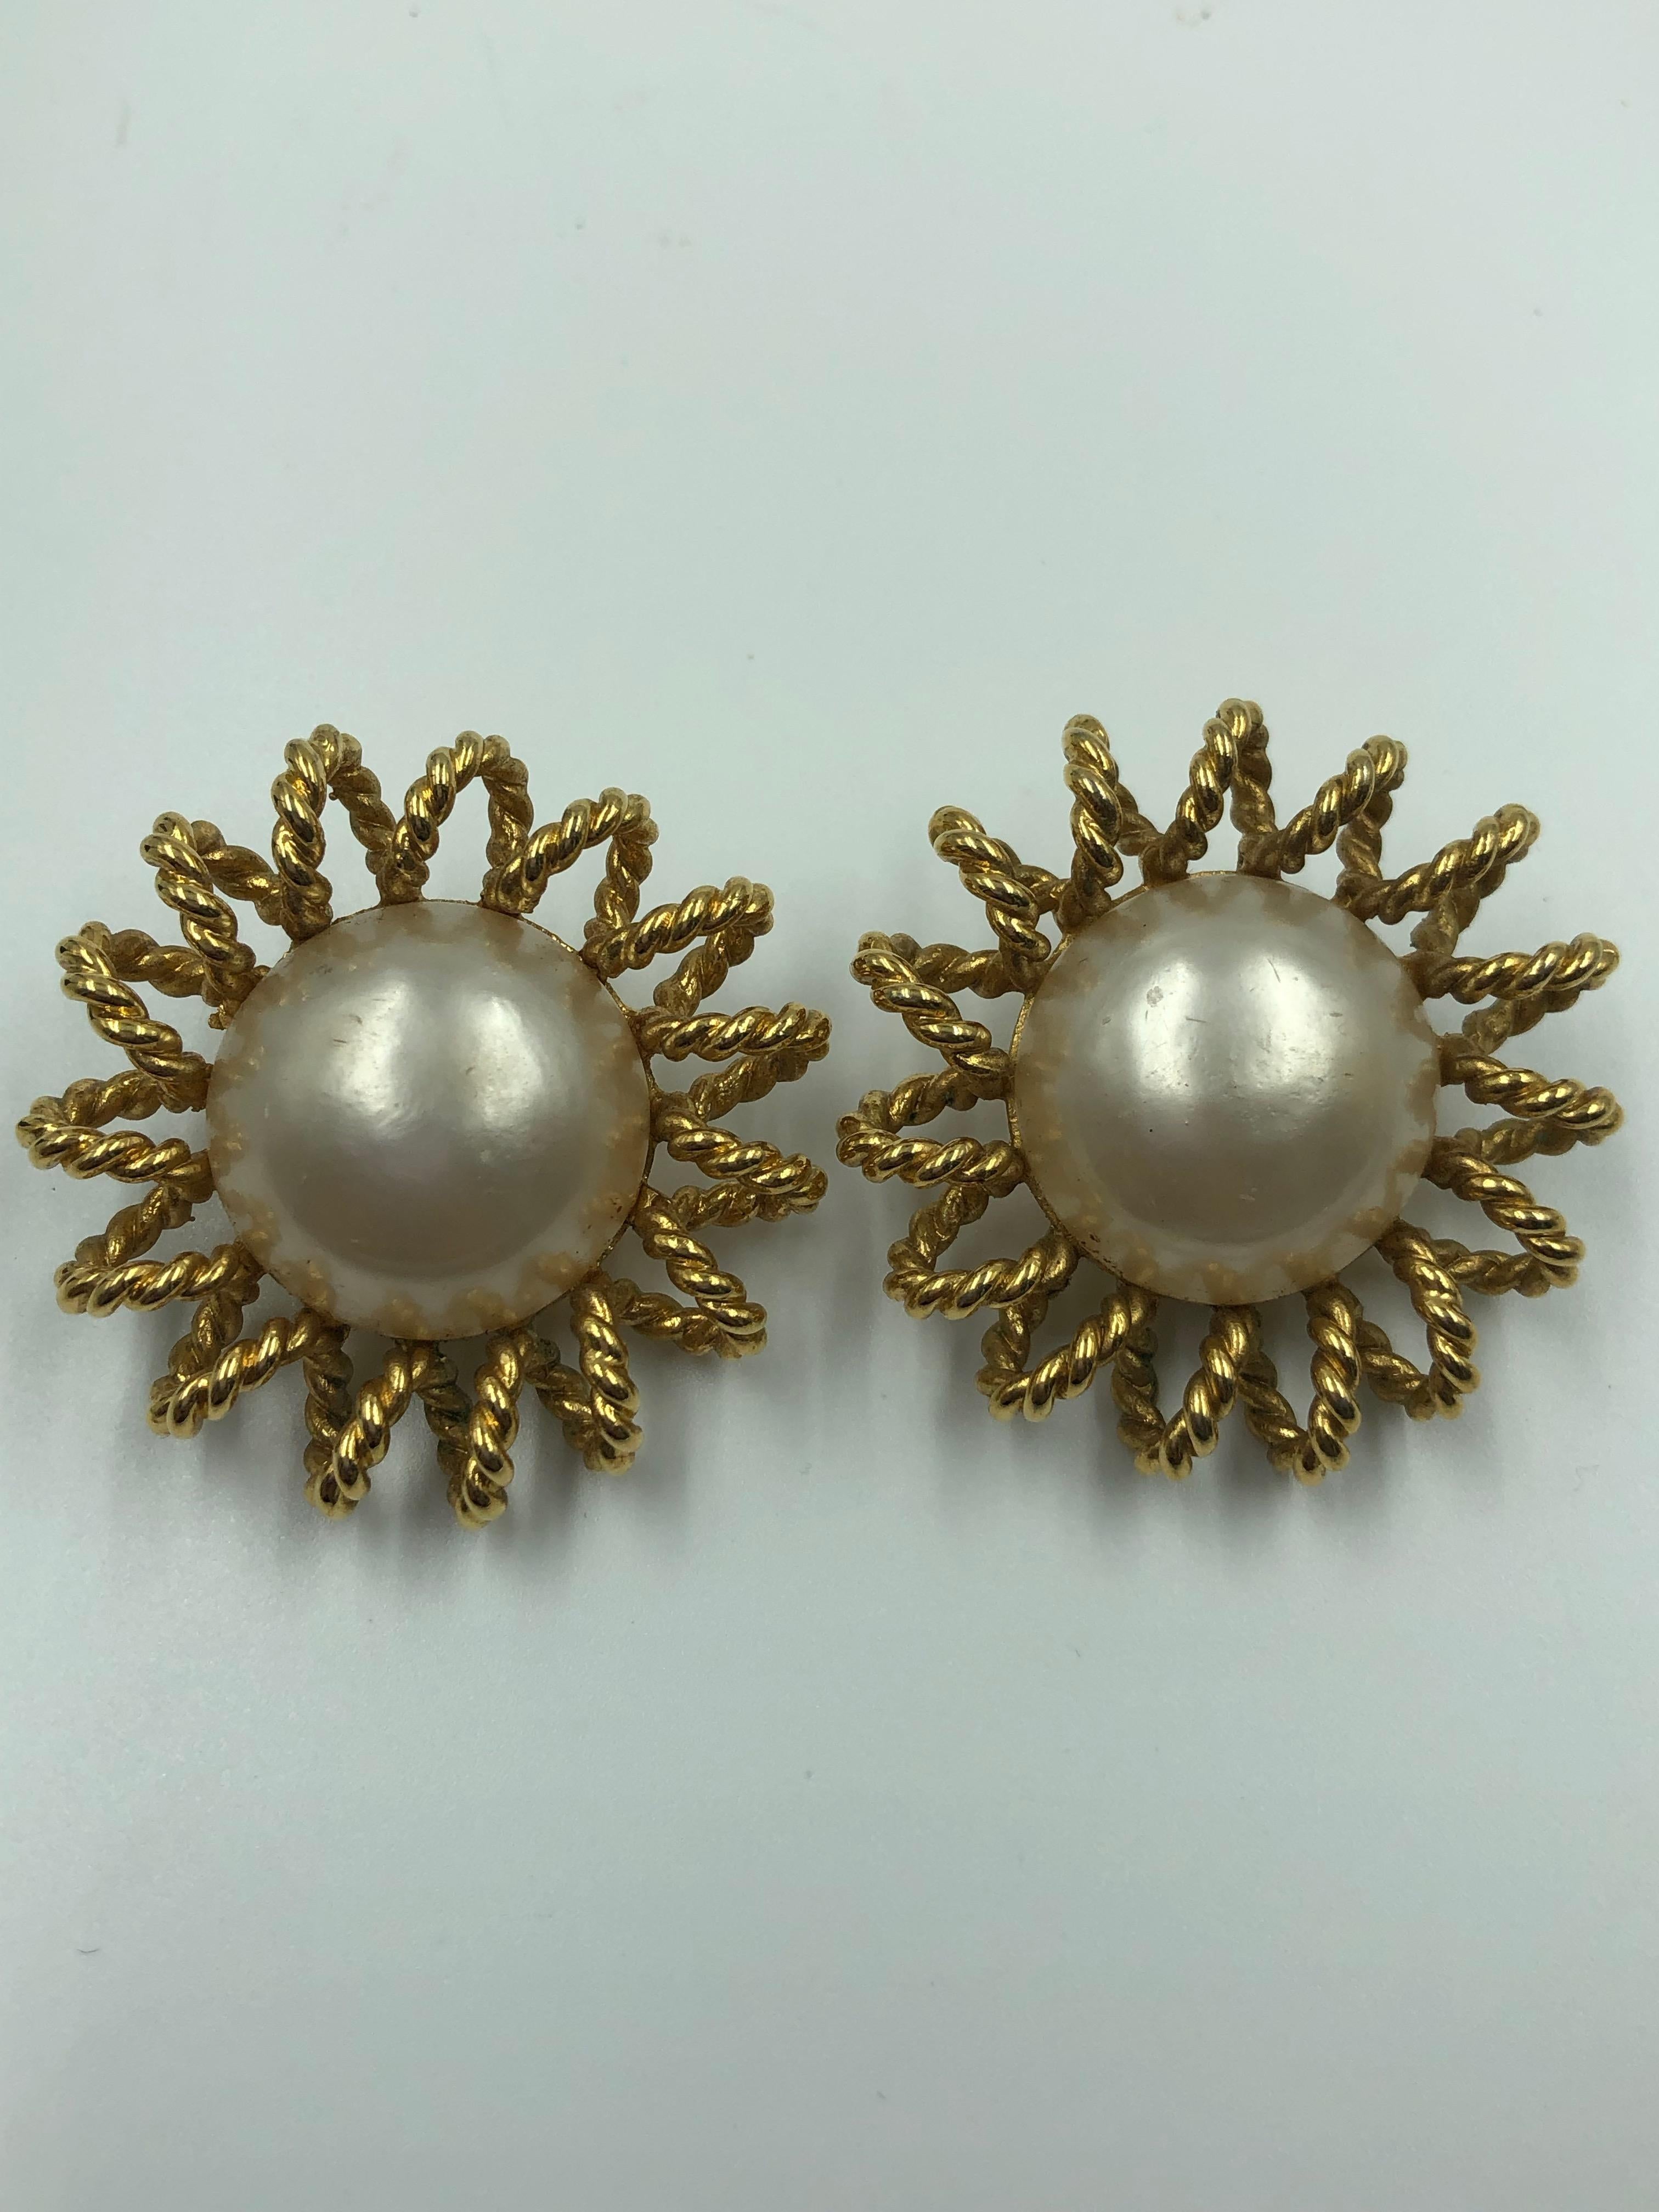 Channel gold-tone alloy starburst clip-on earring pair with Imitation pearl center.

Diameter:-1.5